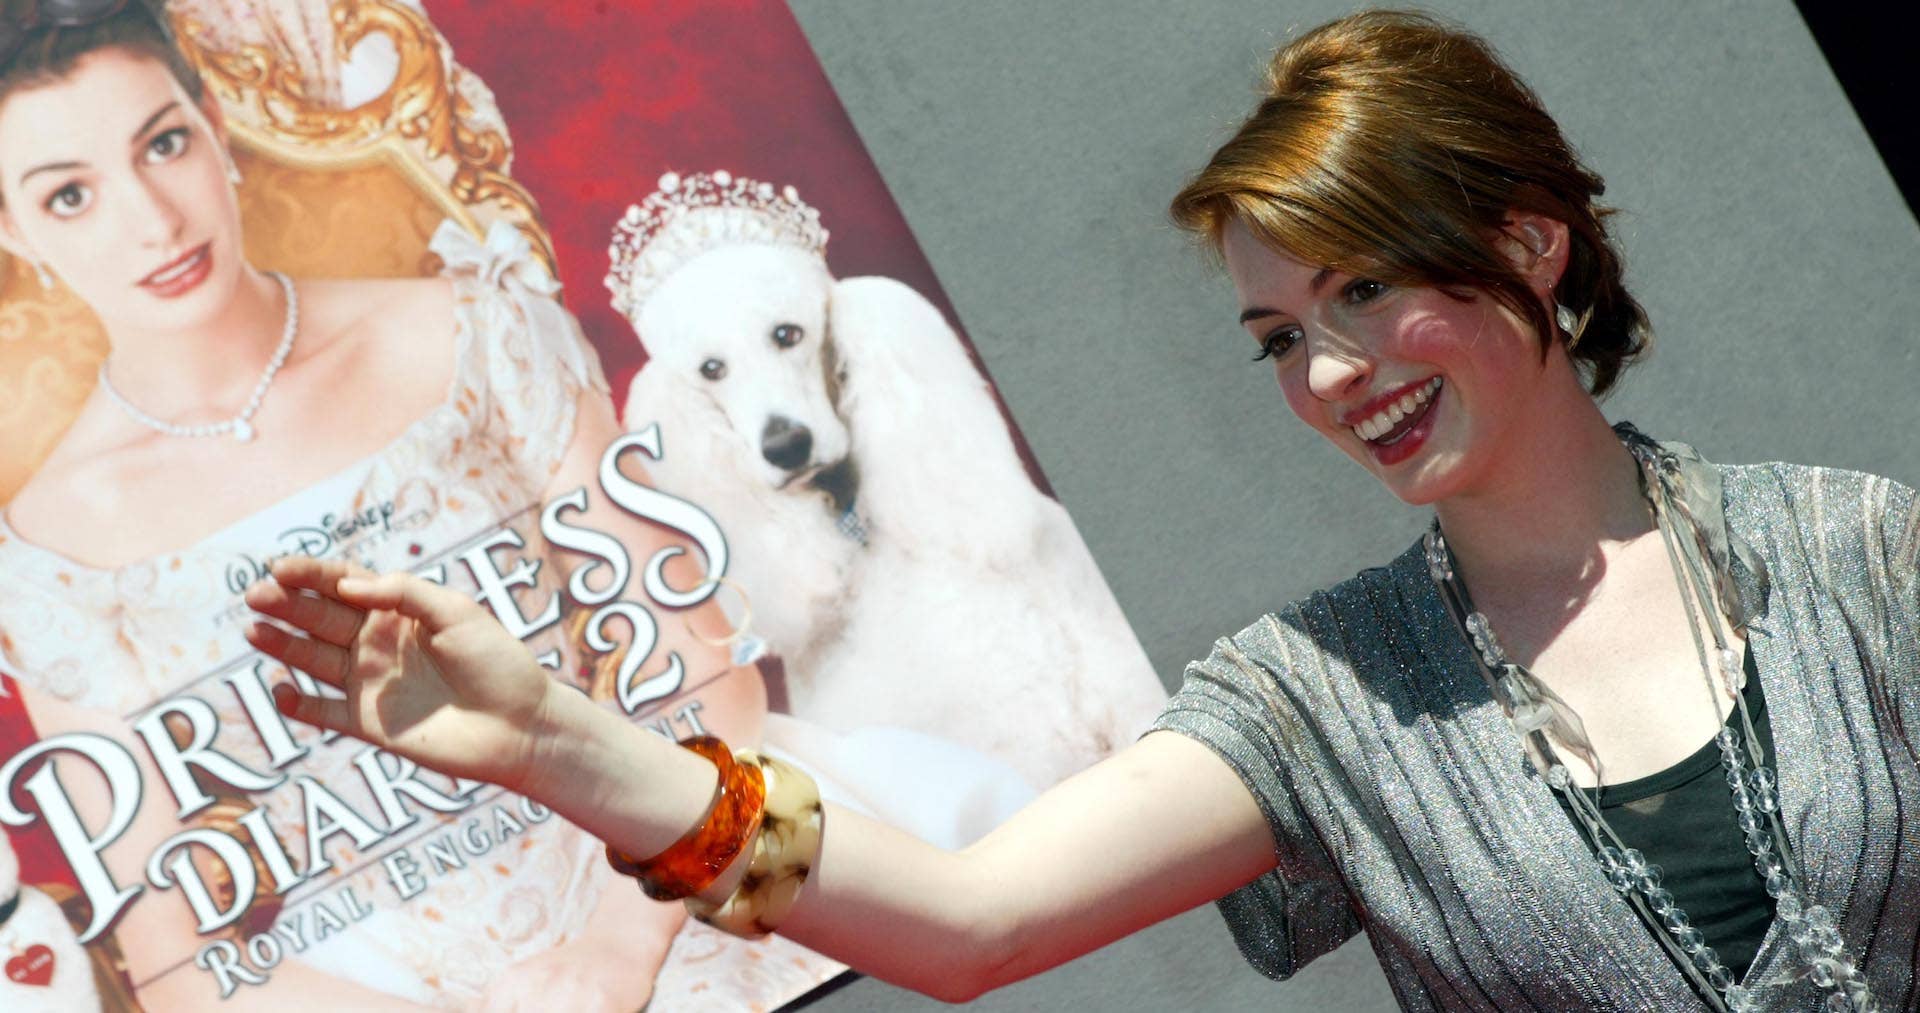 Anne Hathaway attends premiere of 'Princess Diaries 2'